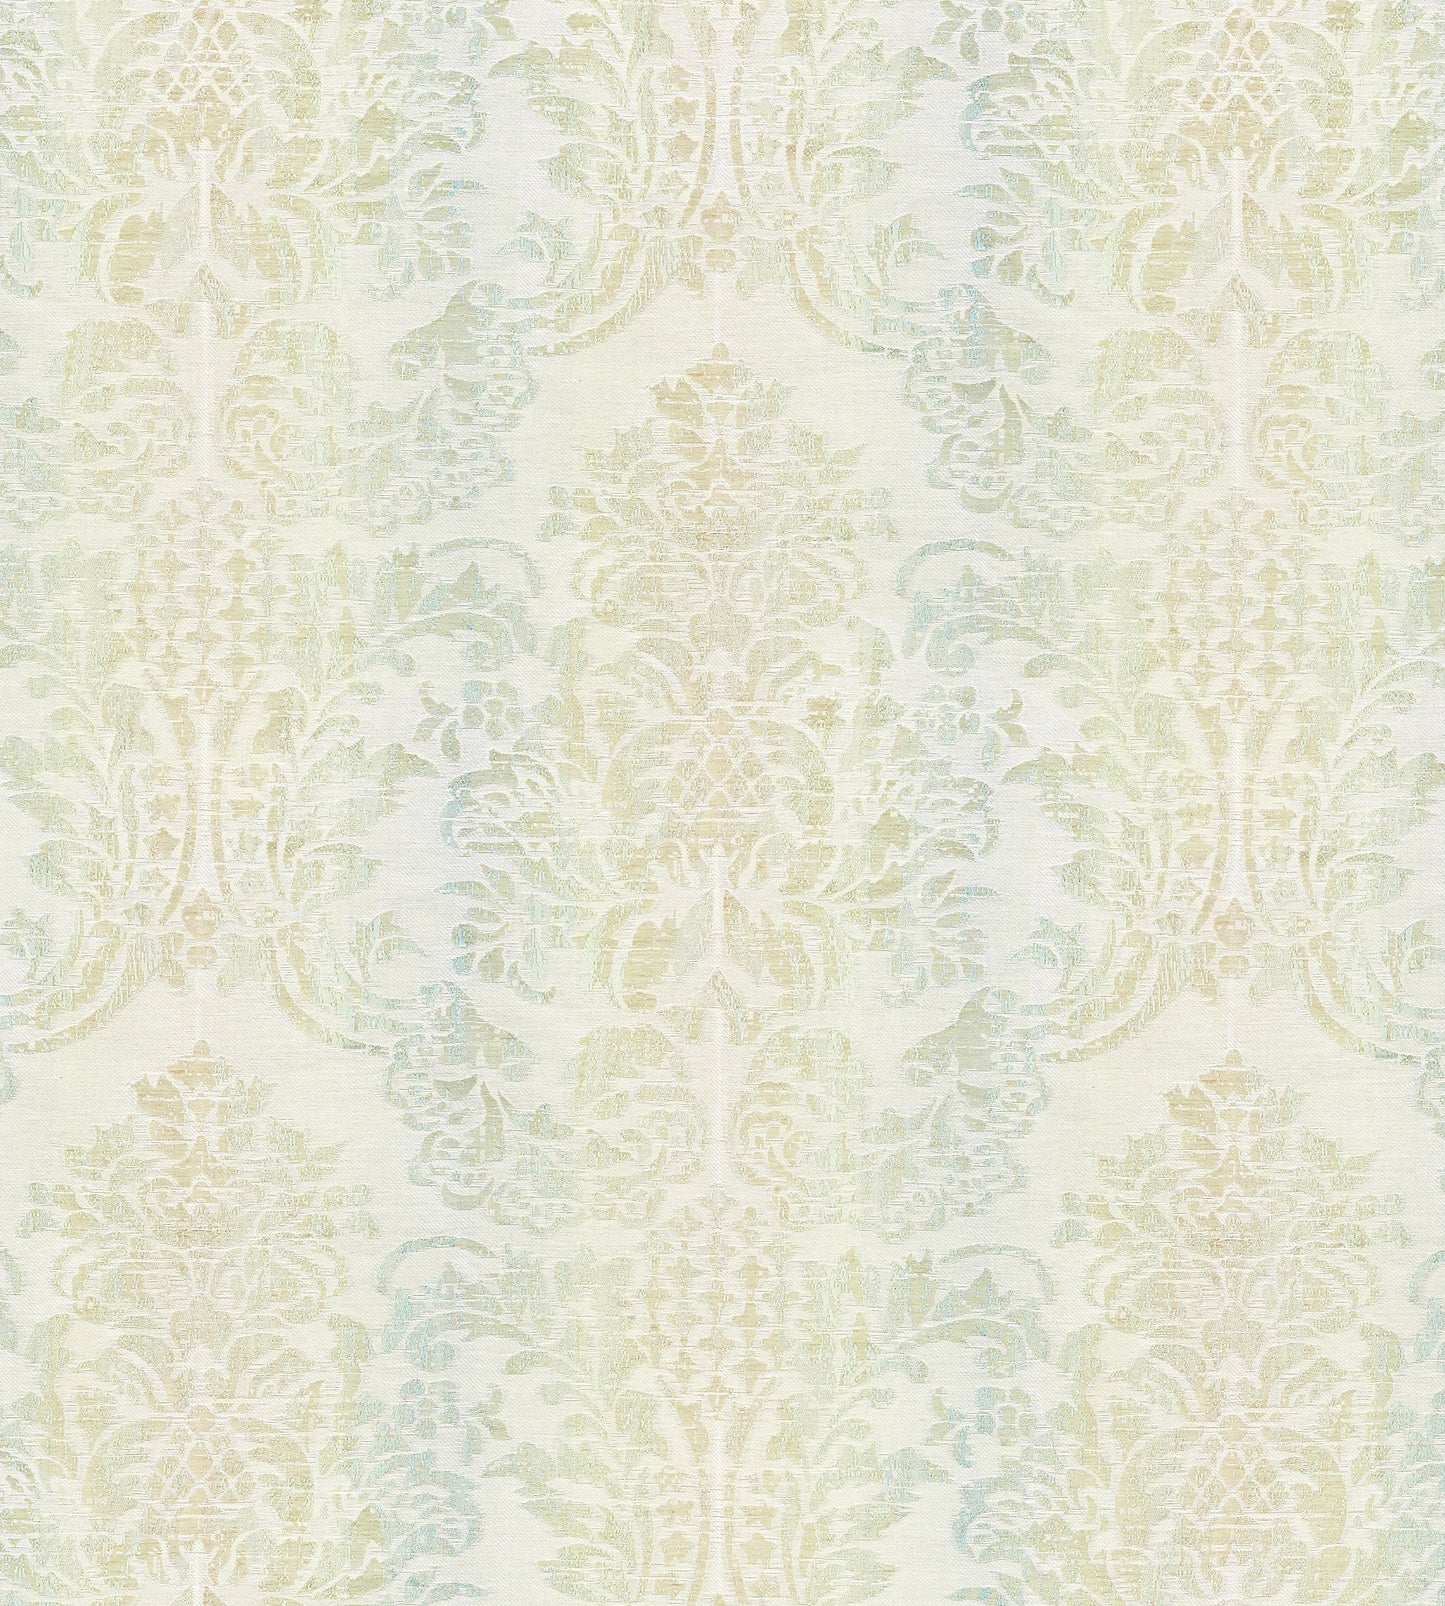 Purchase Scalamandre Fabric Pattern number SC 000227093, Sorrento Linen Damask Mineral 3